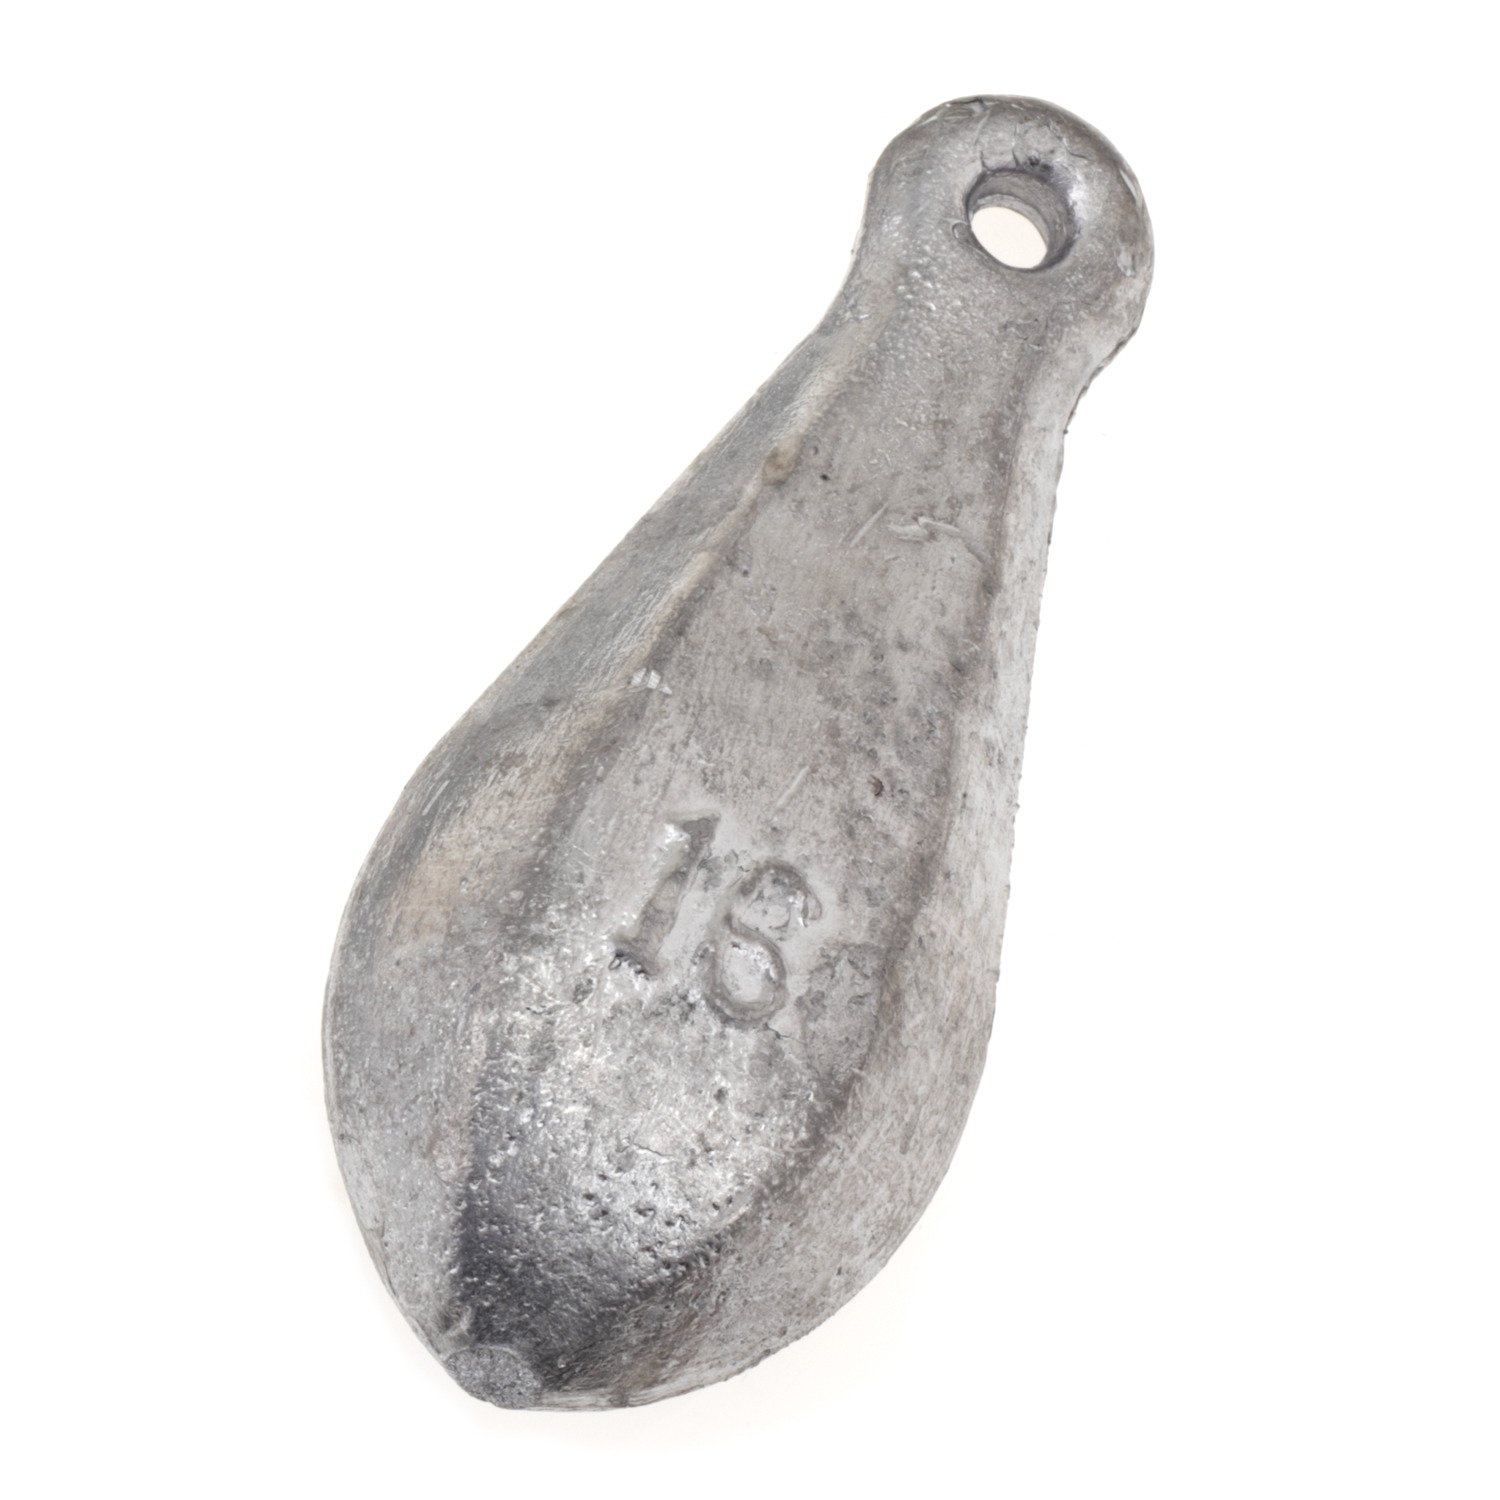  S & J's TACKLE BOX Kaiertcat 6 oz Lead Bank Weights - 10 PER  Pack C : Fishing Sinkers : Sports & Outdoors